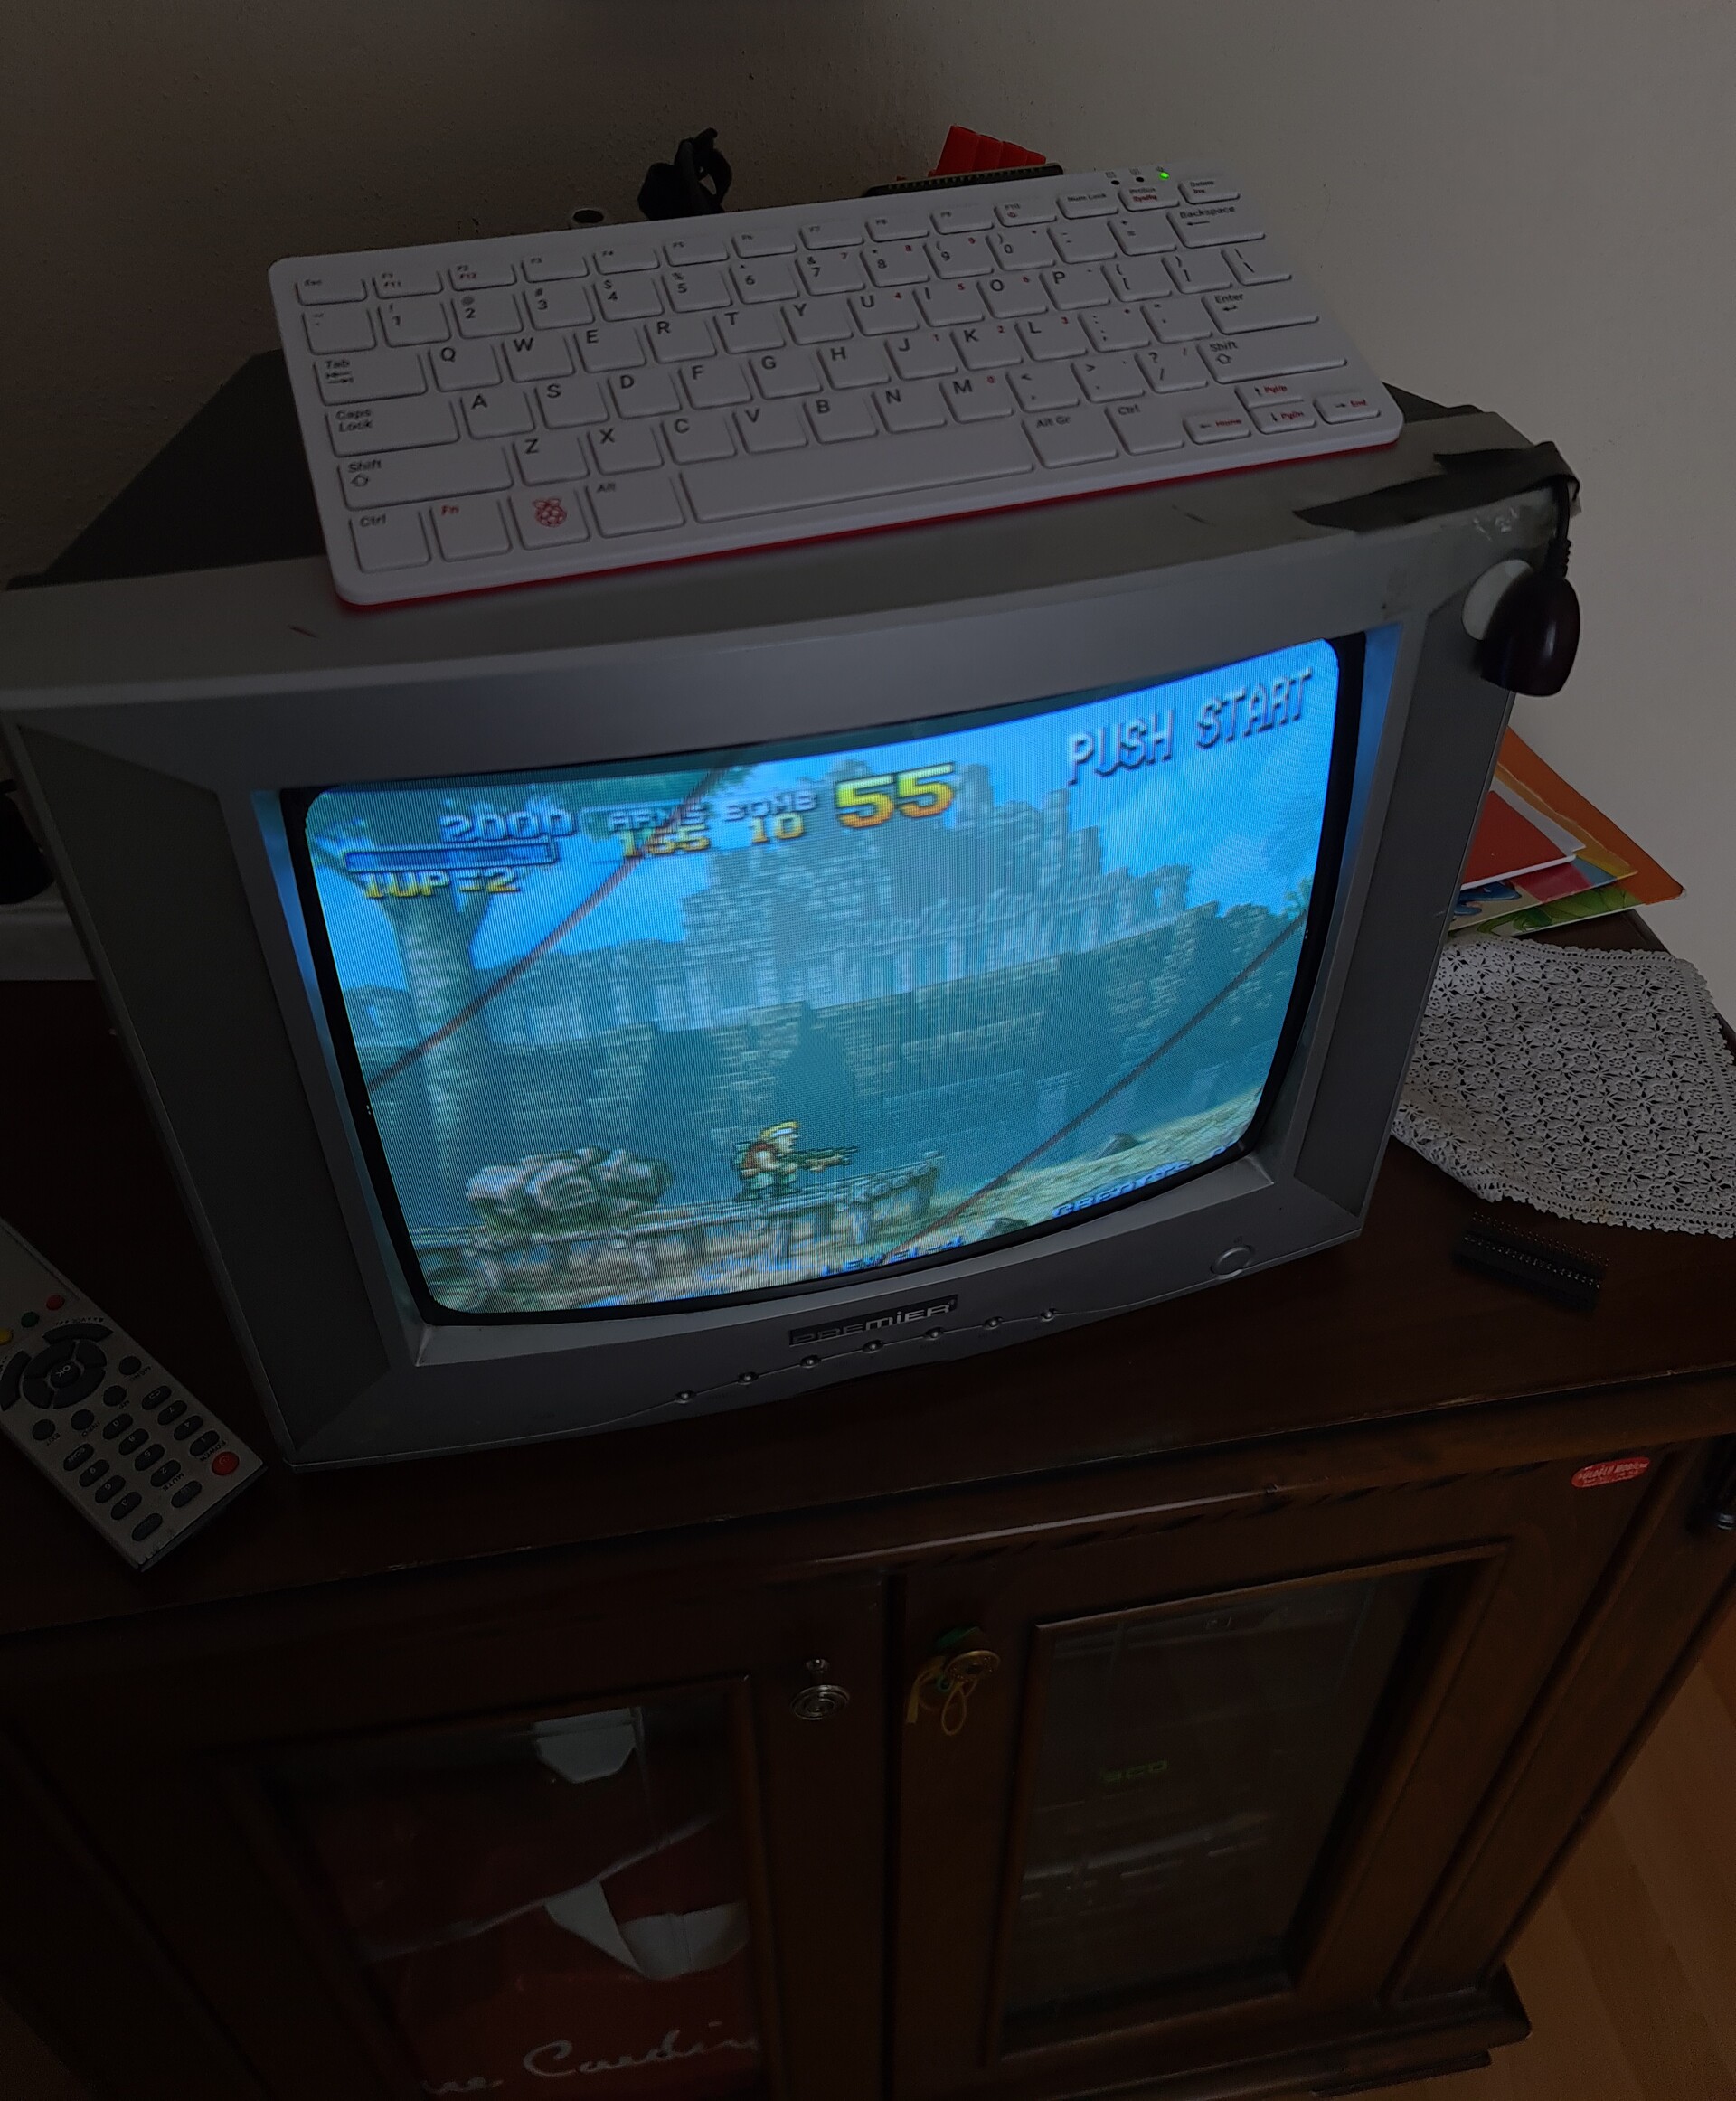 What video games are burned into these CRTs?